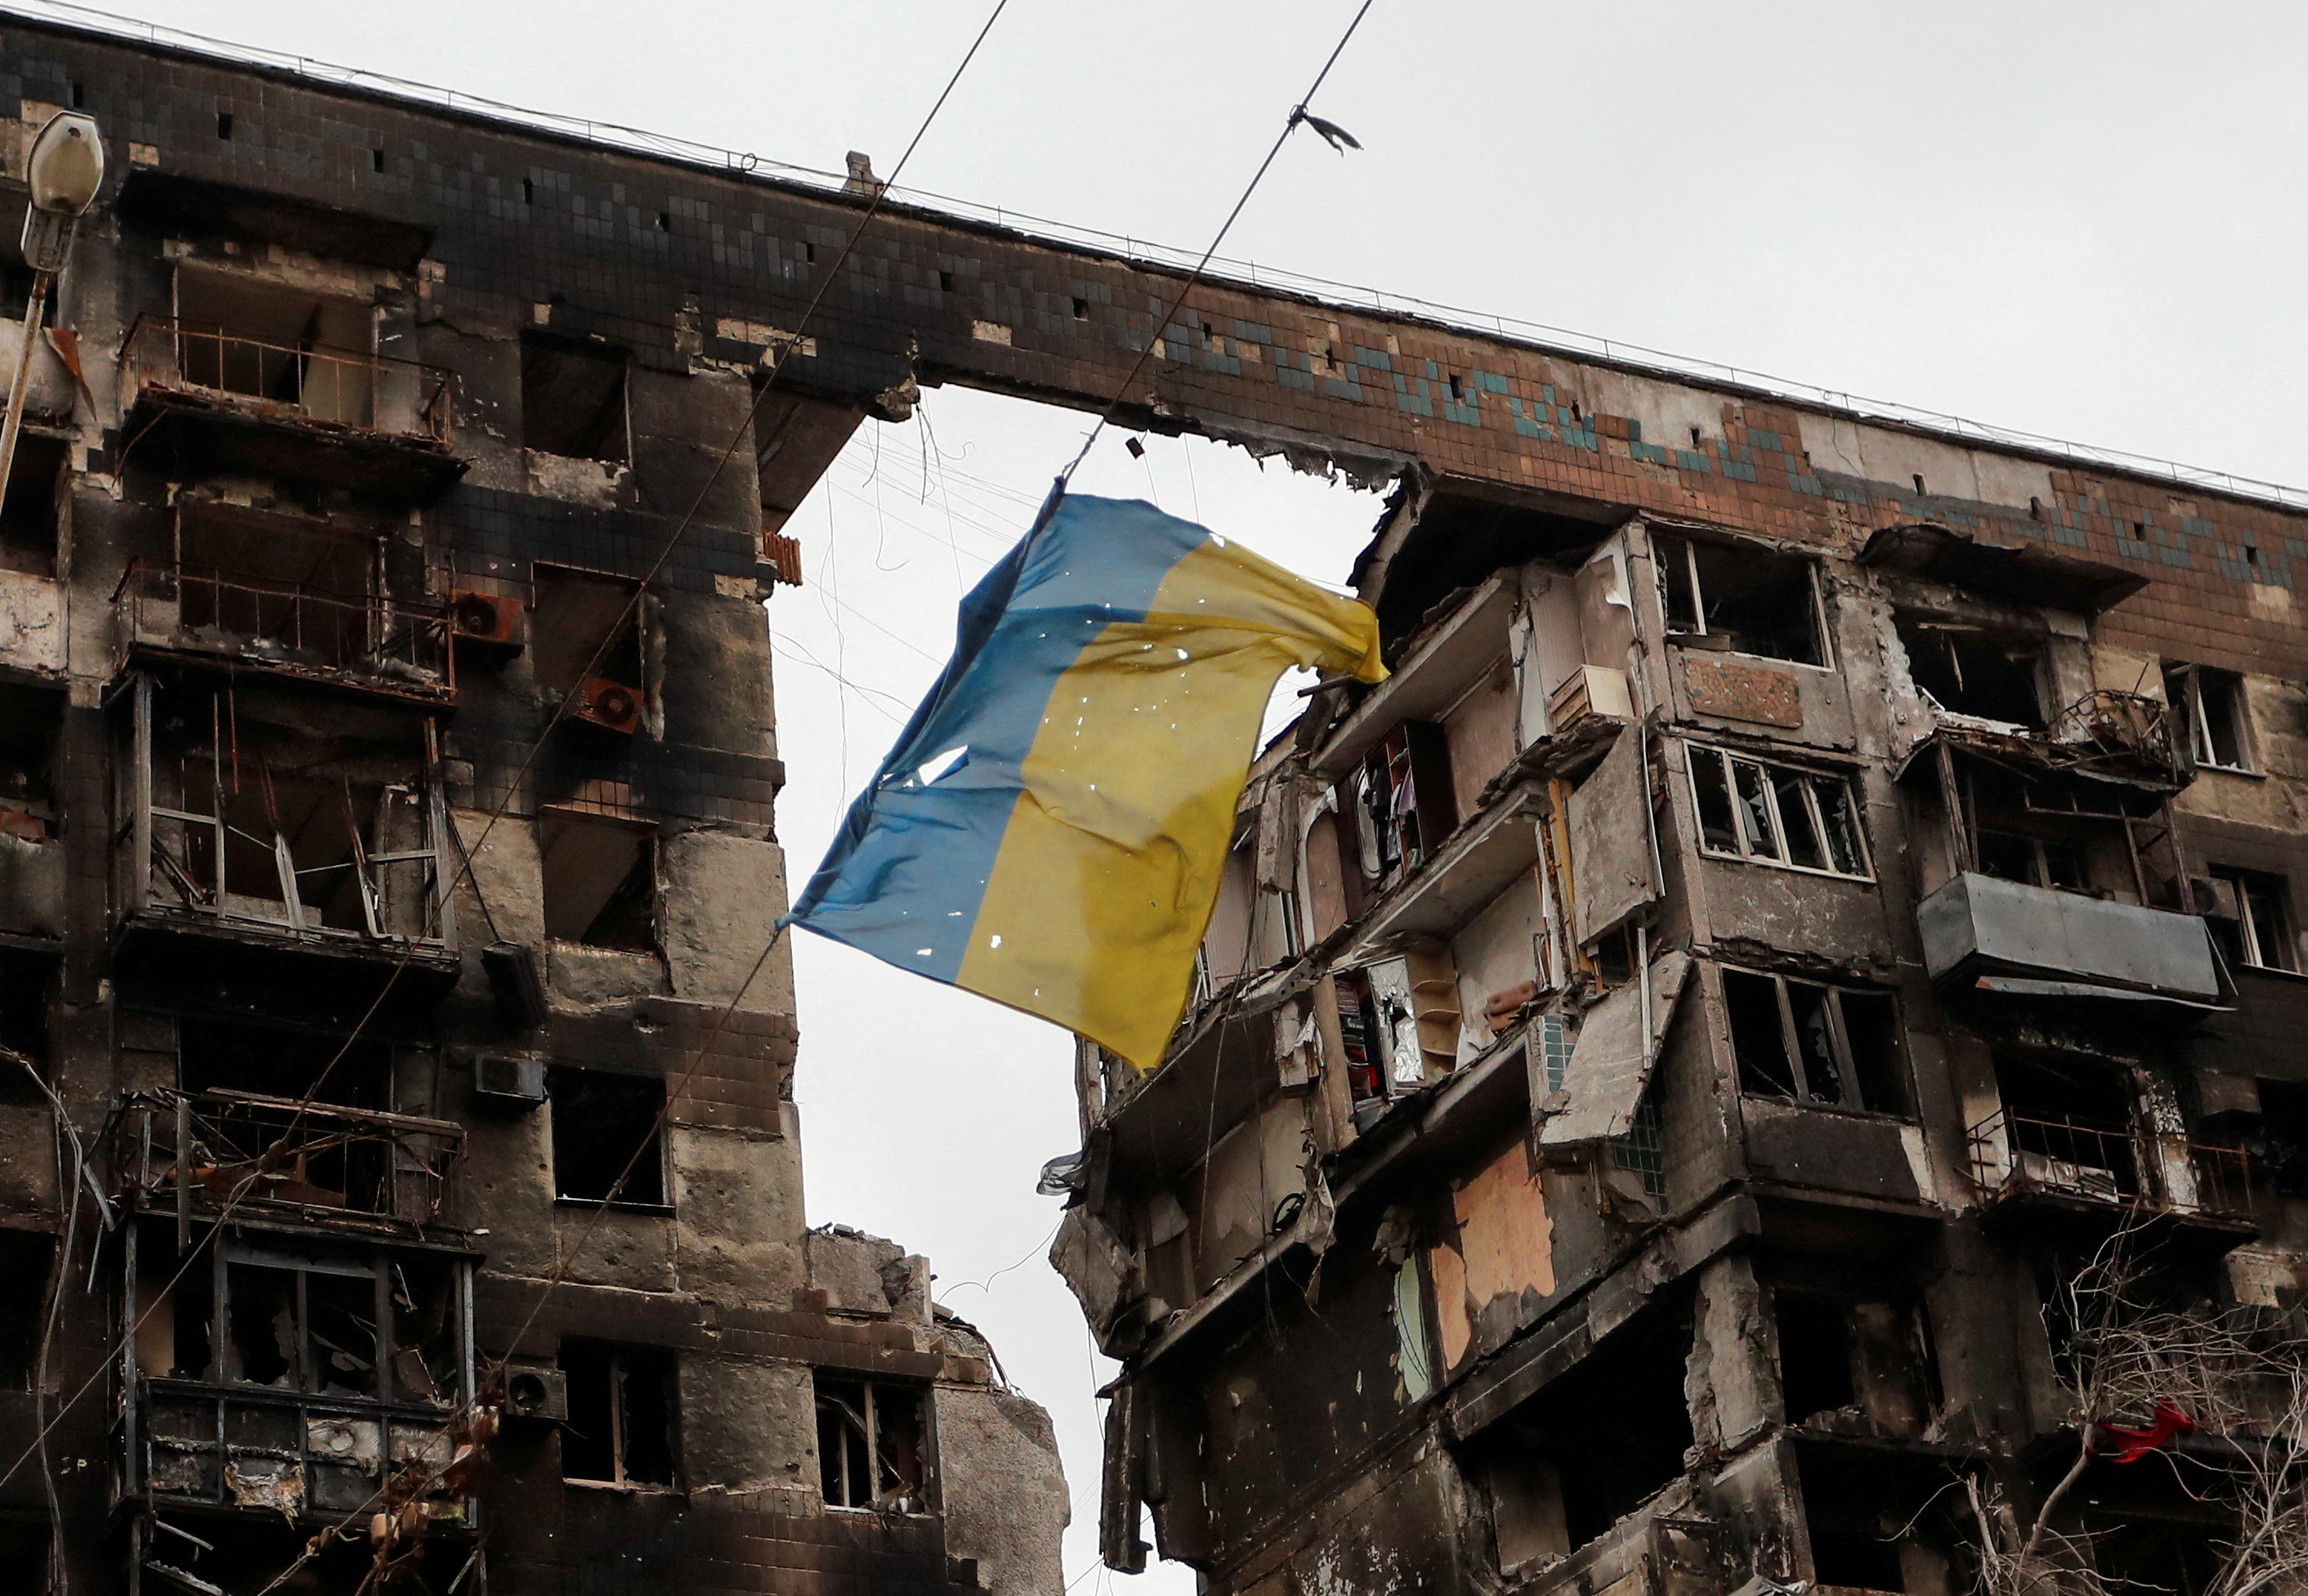 A view shows a Ukrainian flag near a destroyed building in Mariupol